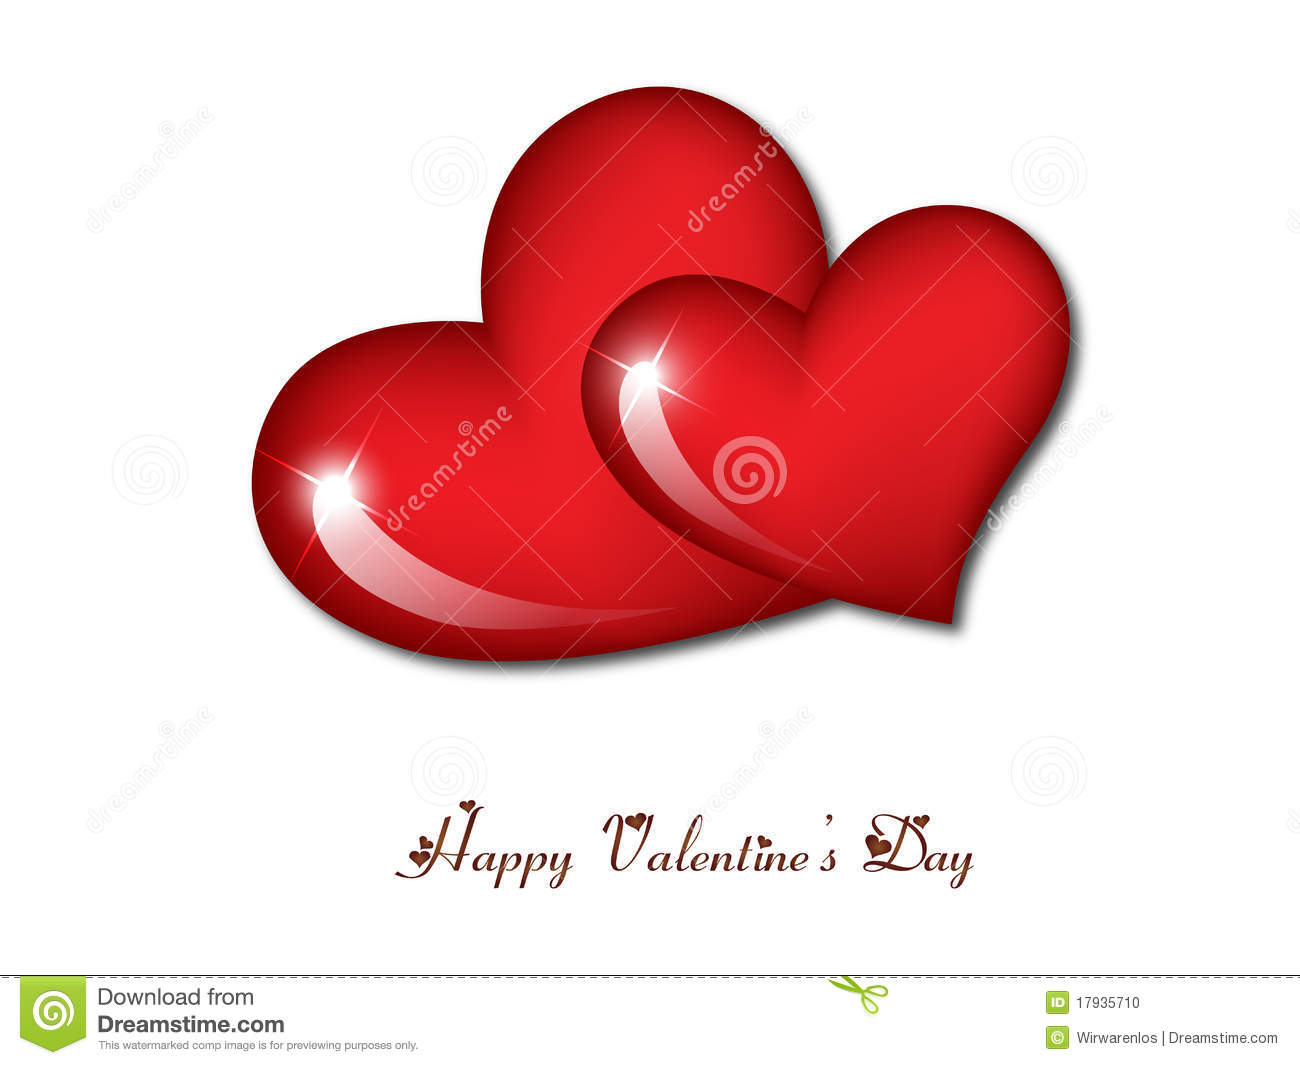 Happy Valentine’s Day Two Red Hearts